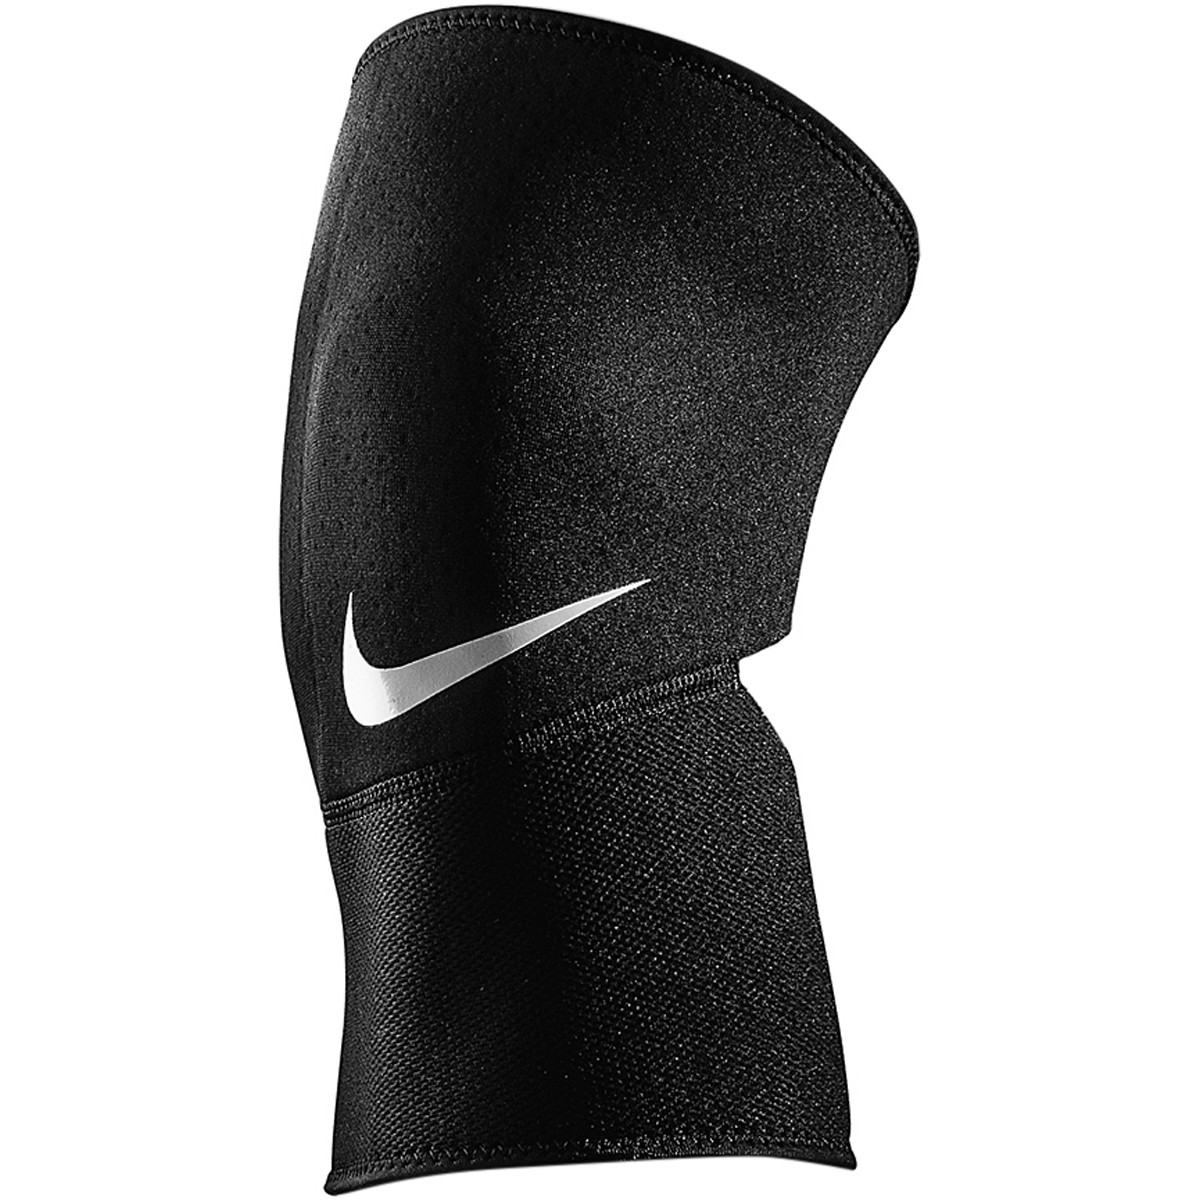 NIKE CLOSED KNEE STRAP 2.0 - Meilleures offres soldes - BIG SALES PERIOD